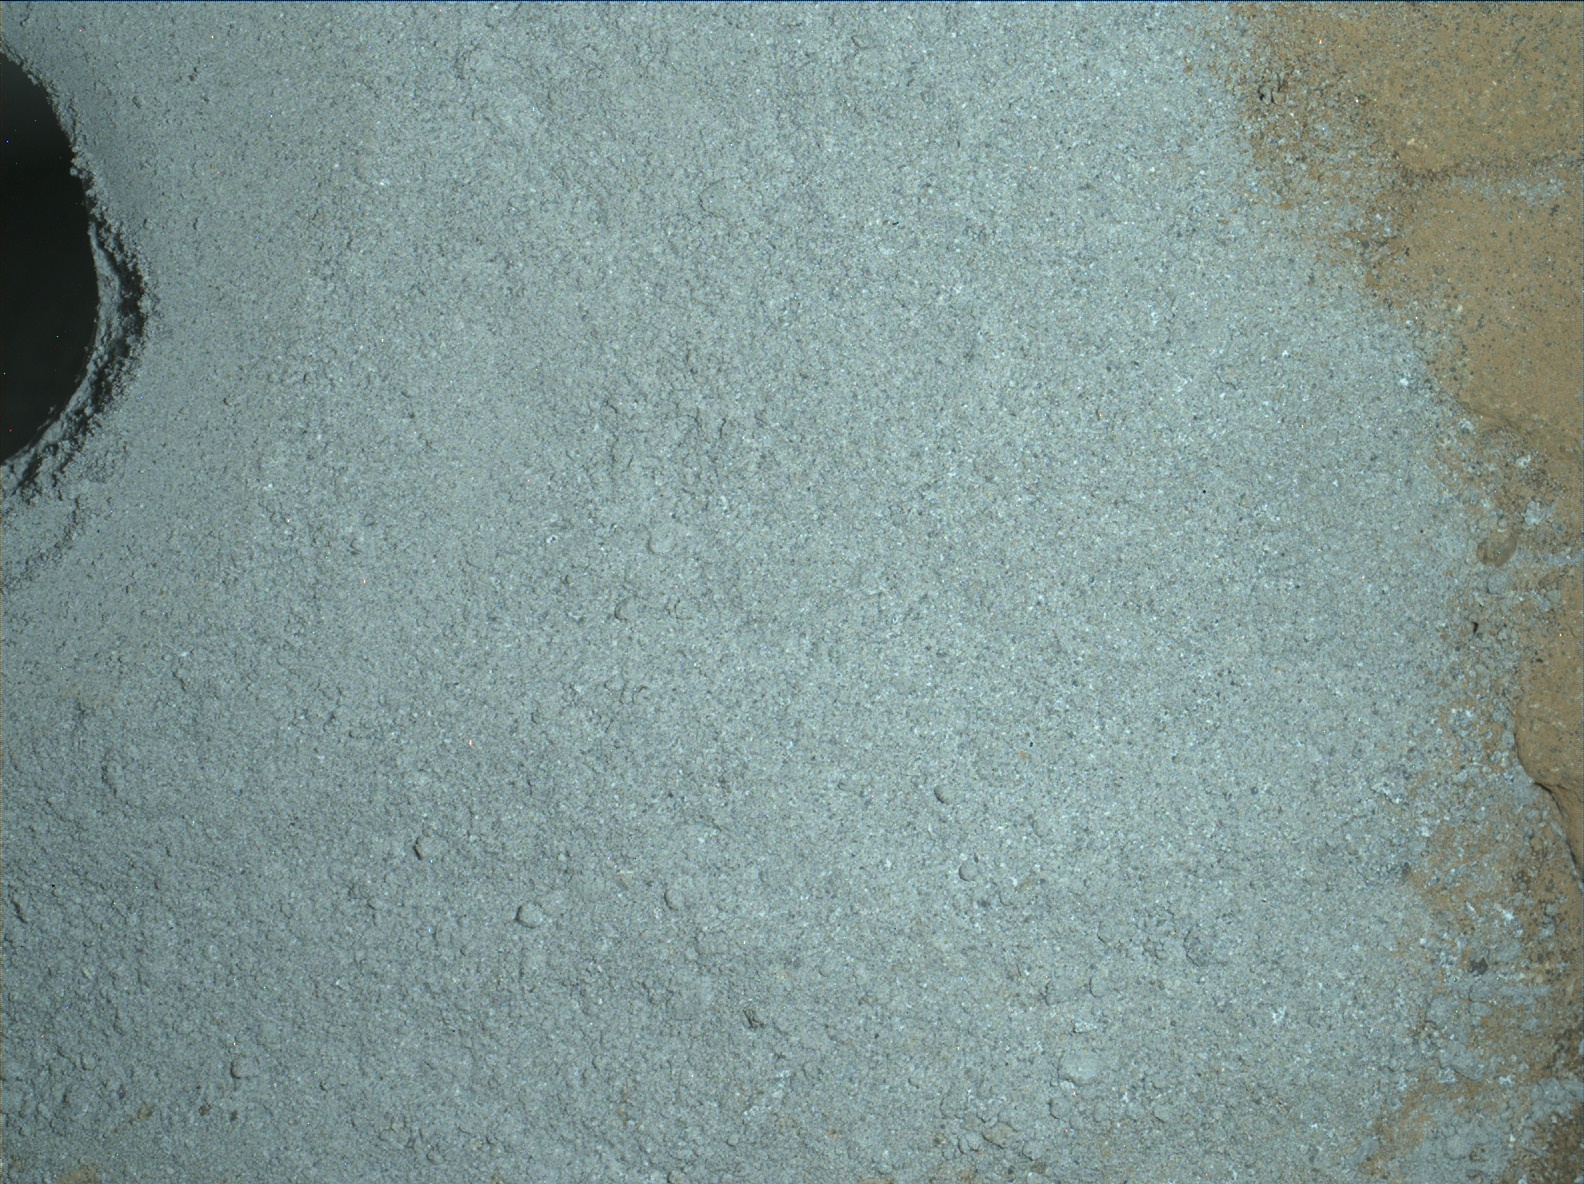 Nasa's Mars rover Curiosity acquired this image using its Mars Hand Lens Imager (MAHLI) on Sol 1142